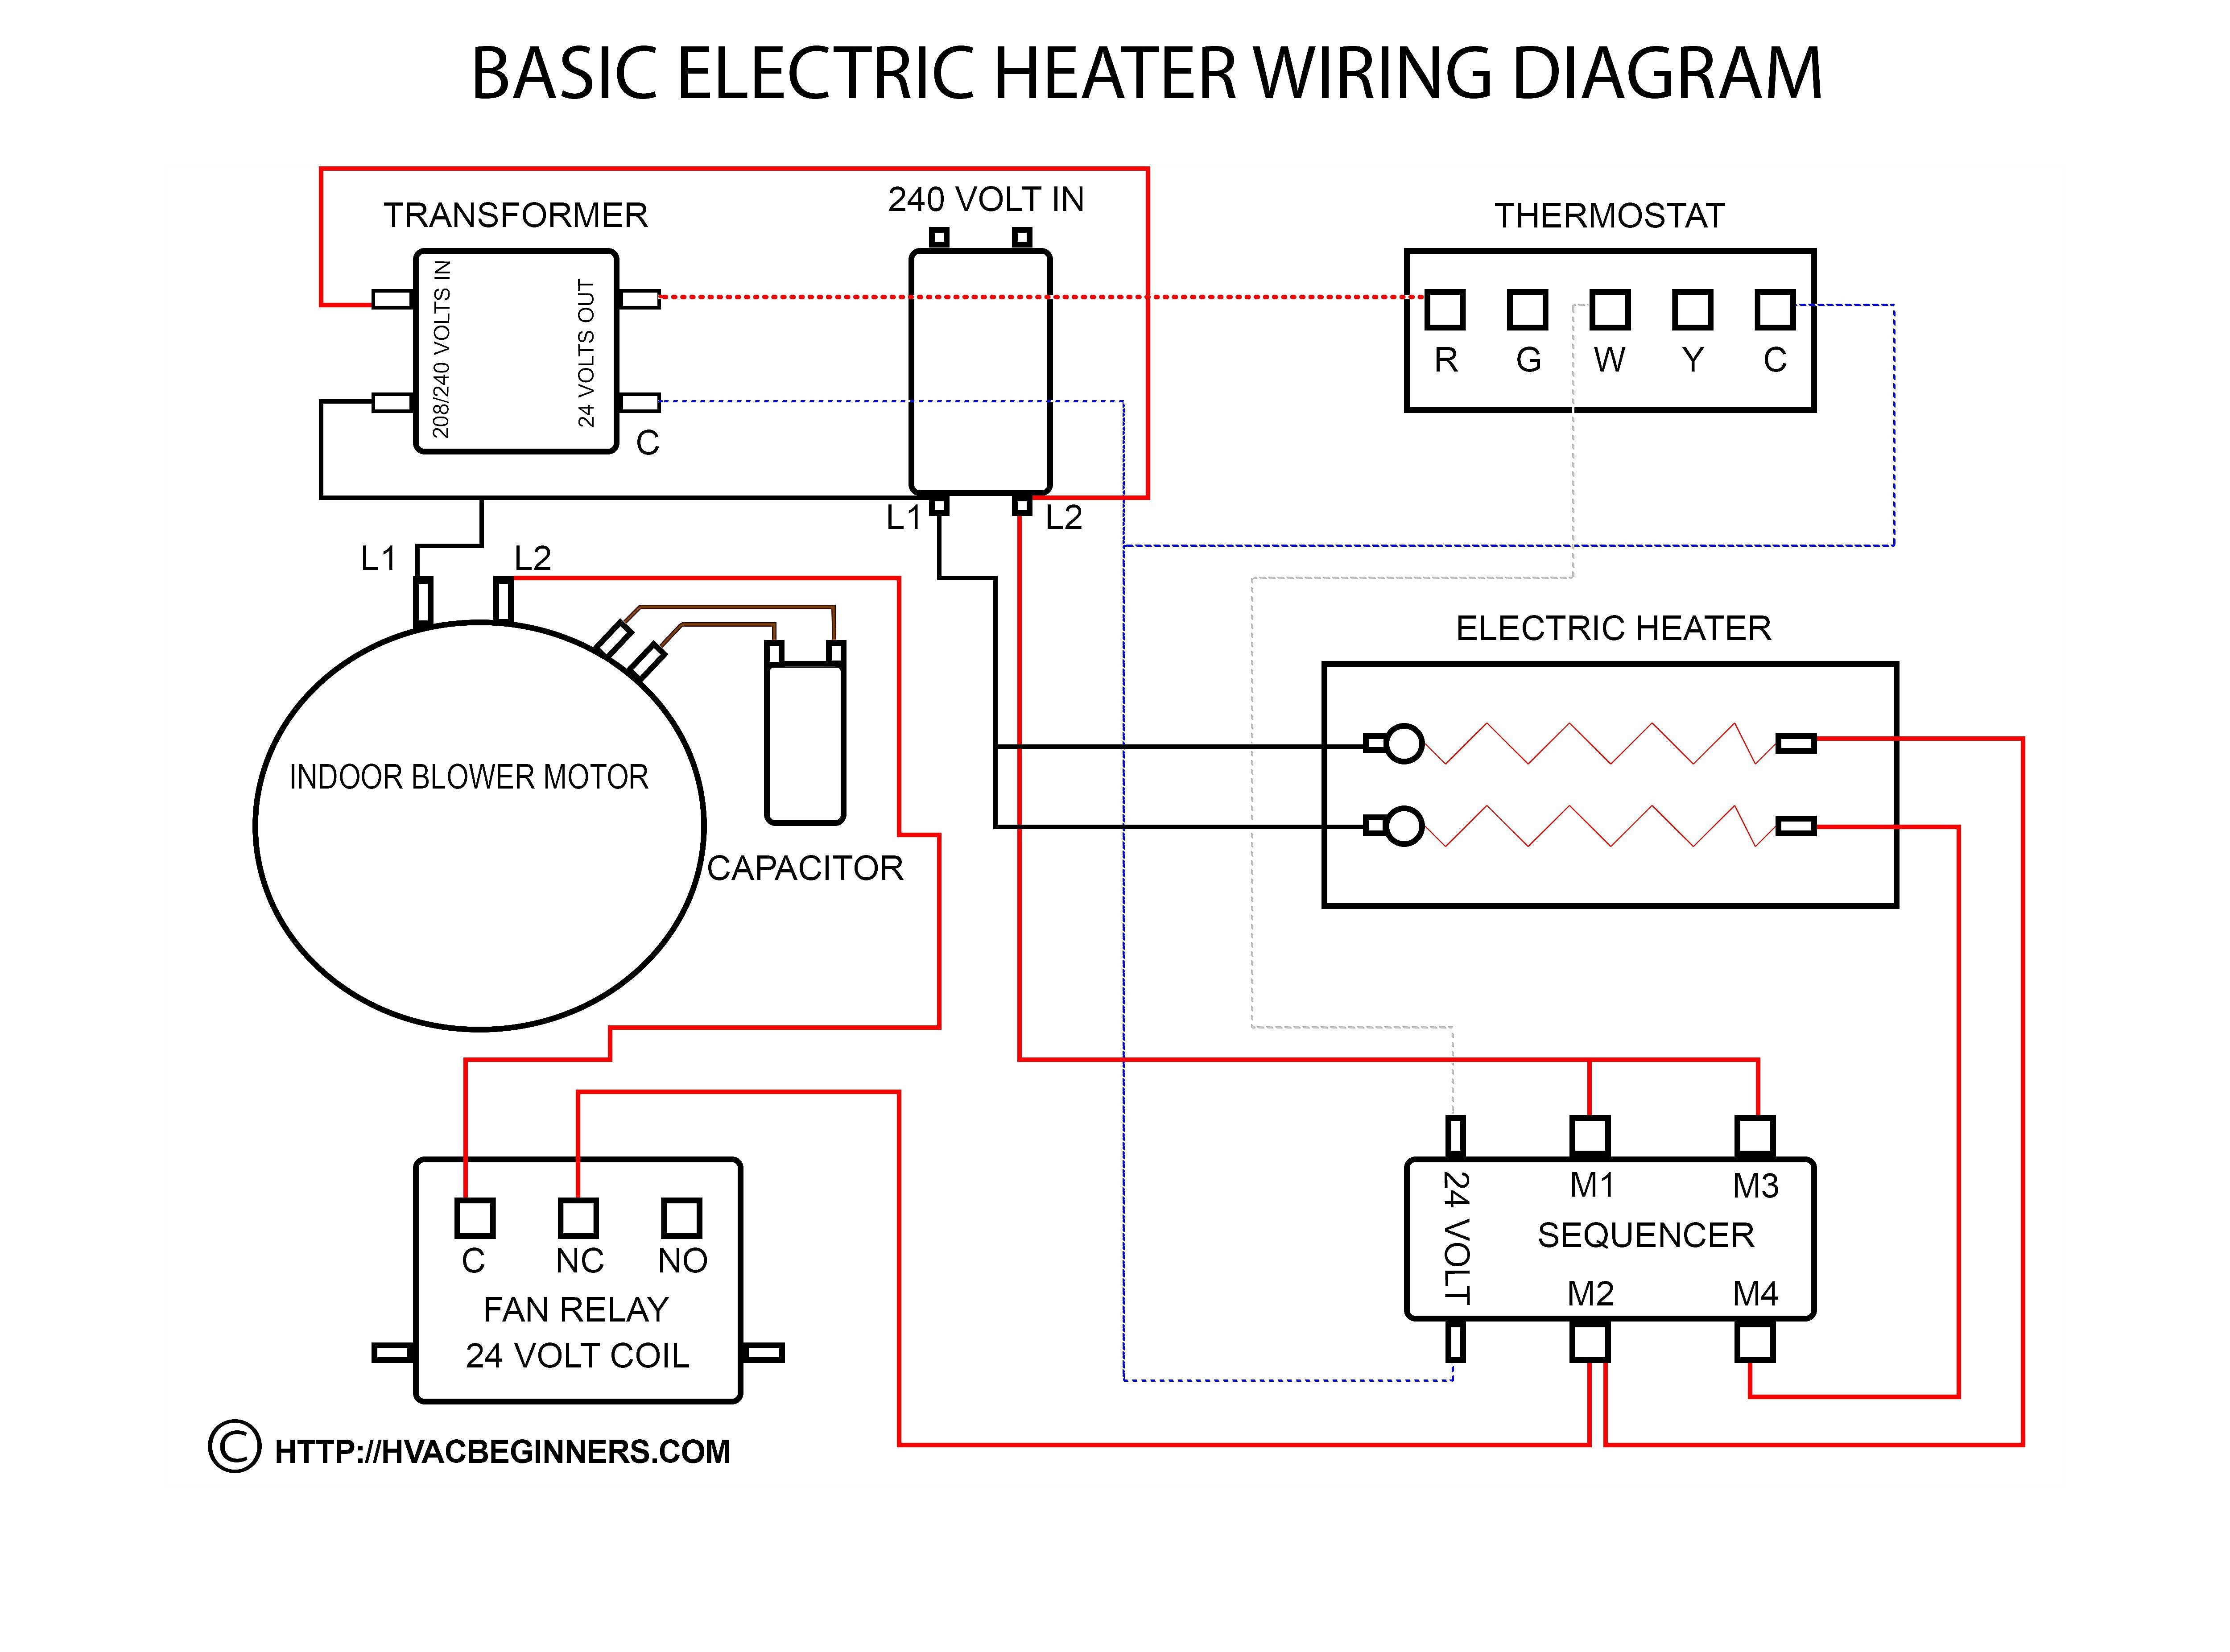 Electrical Wiring Diagram Perfect Wiring Diagram Explained 2019 Wiring Diagram for Trailer Valid Http